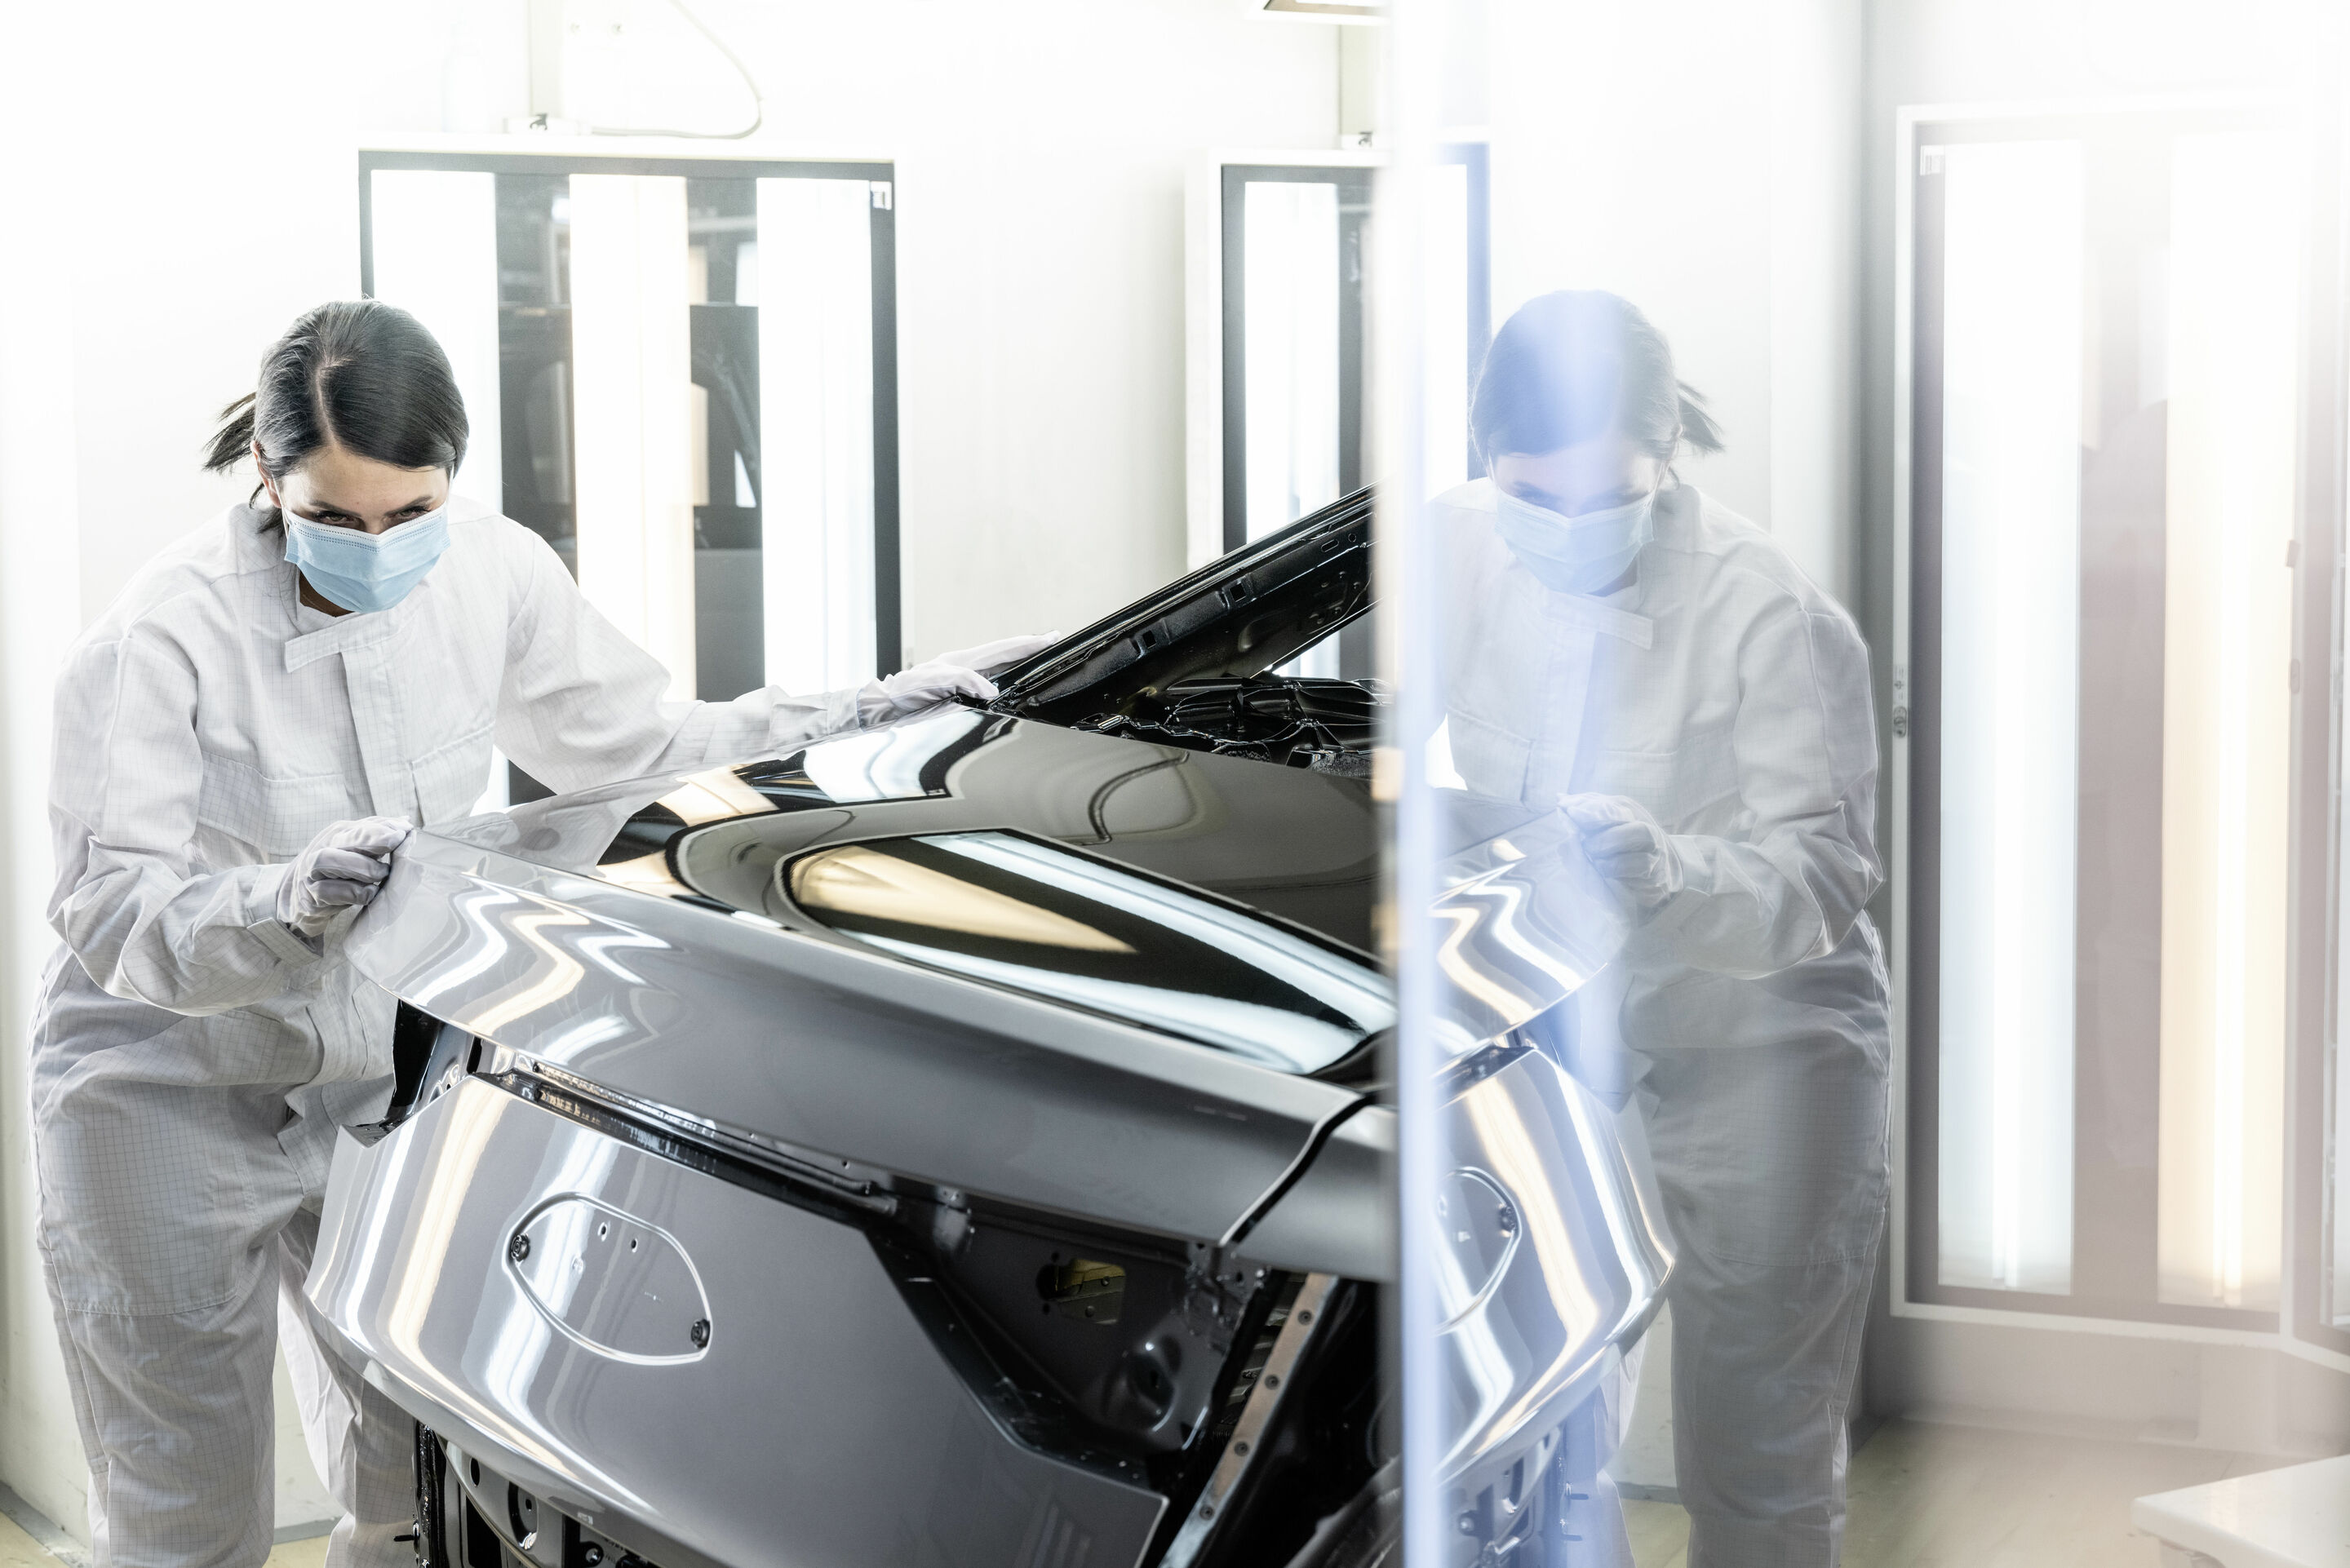 Vehicle production at the Neckarsulm site